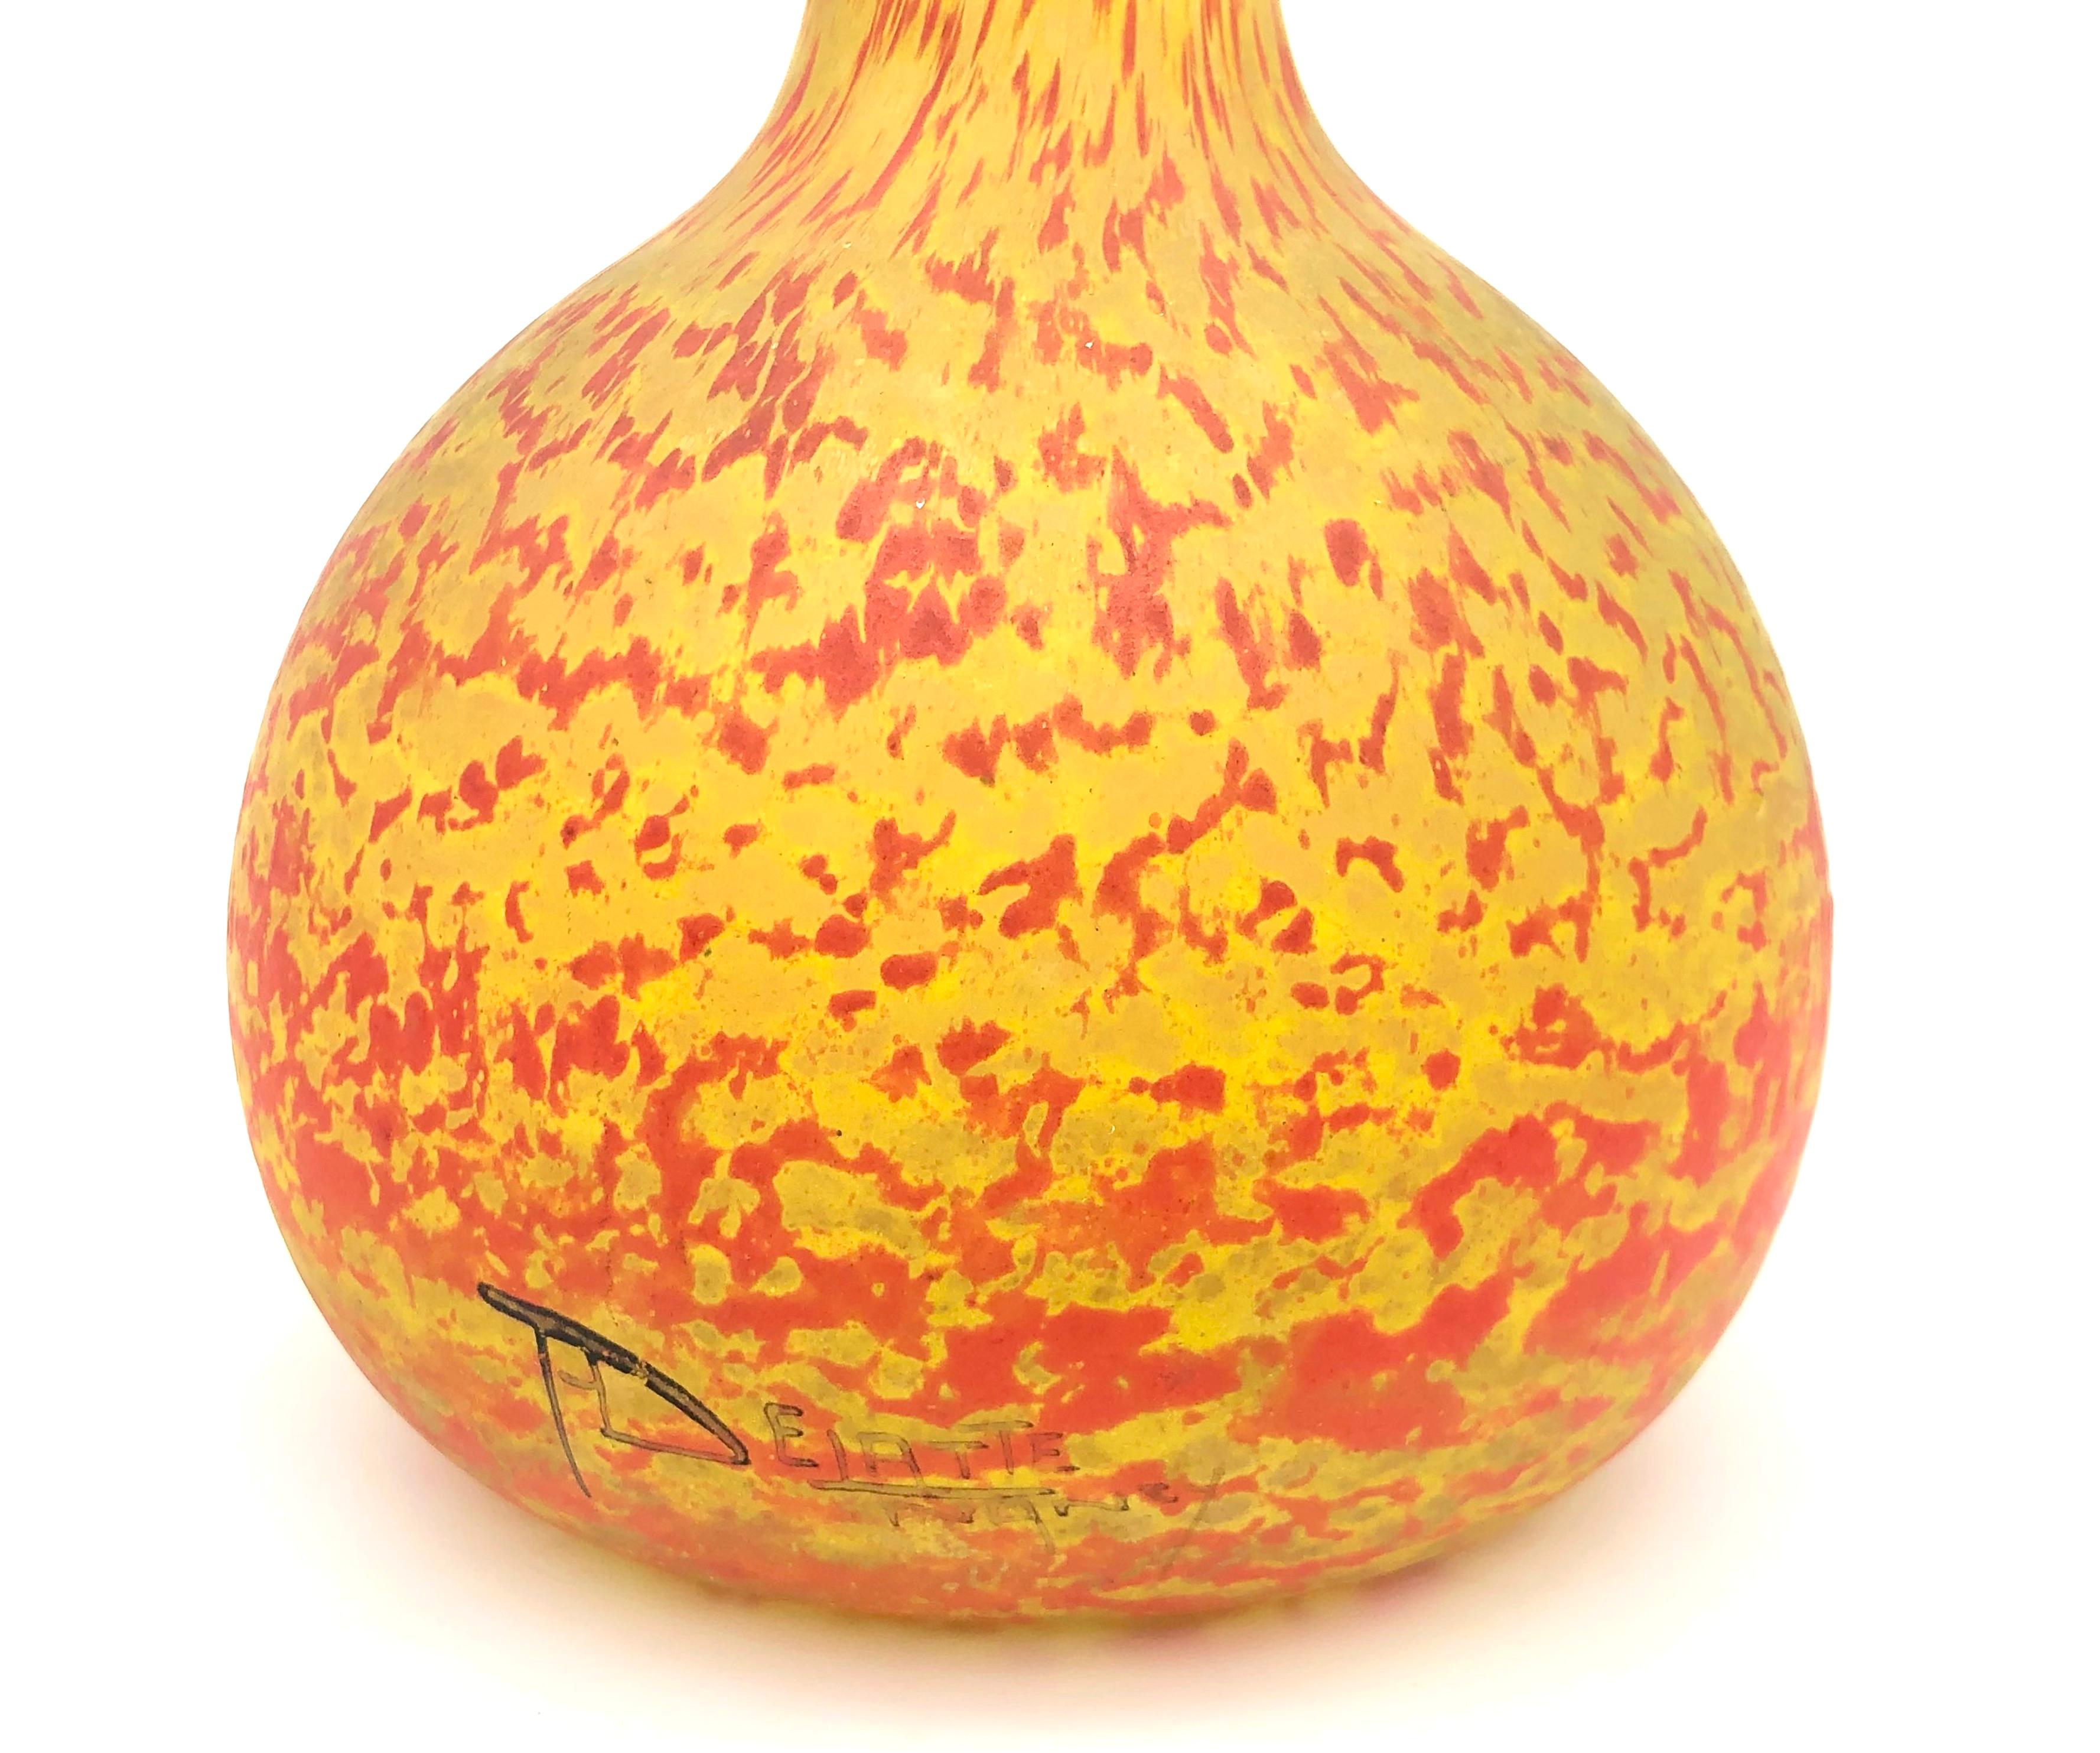 This good size glass vase was created in 1920 ca by the French artist glass  maker André Delatte.  (Chatenois/Vosges 1887 - Toulouse/Haute Garonne 1953) - Künstler. Französischer Glaskünstler. In 1921 he founded the glass works 'Les Verreries de